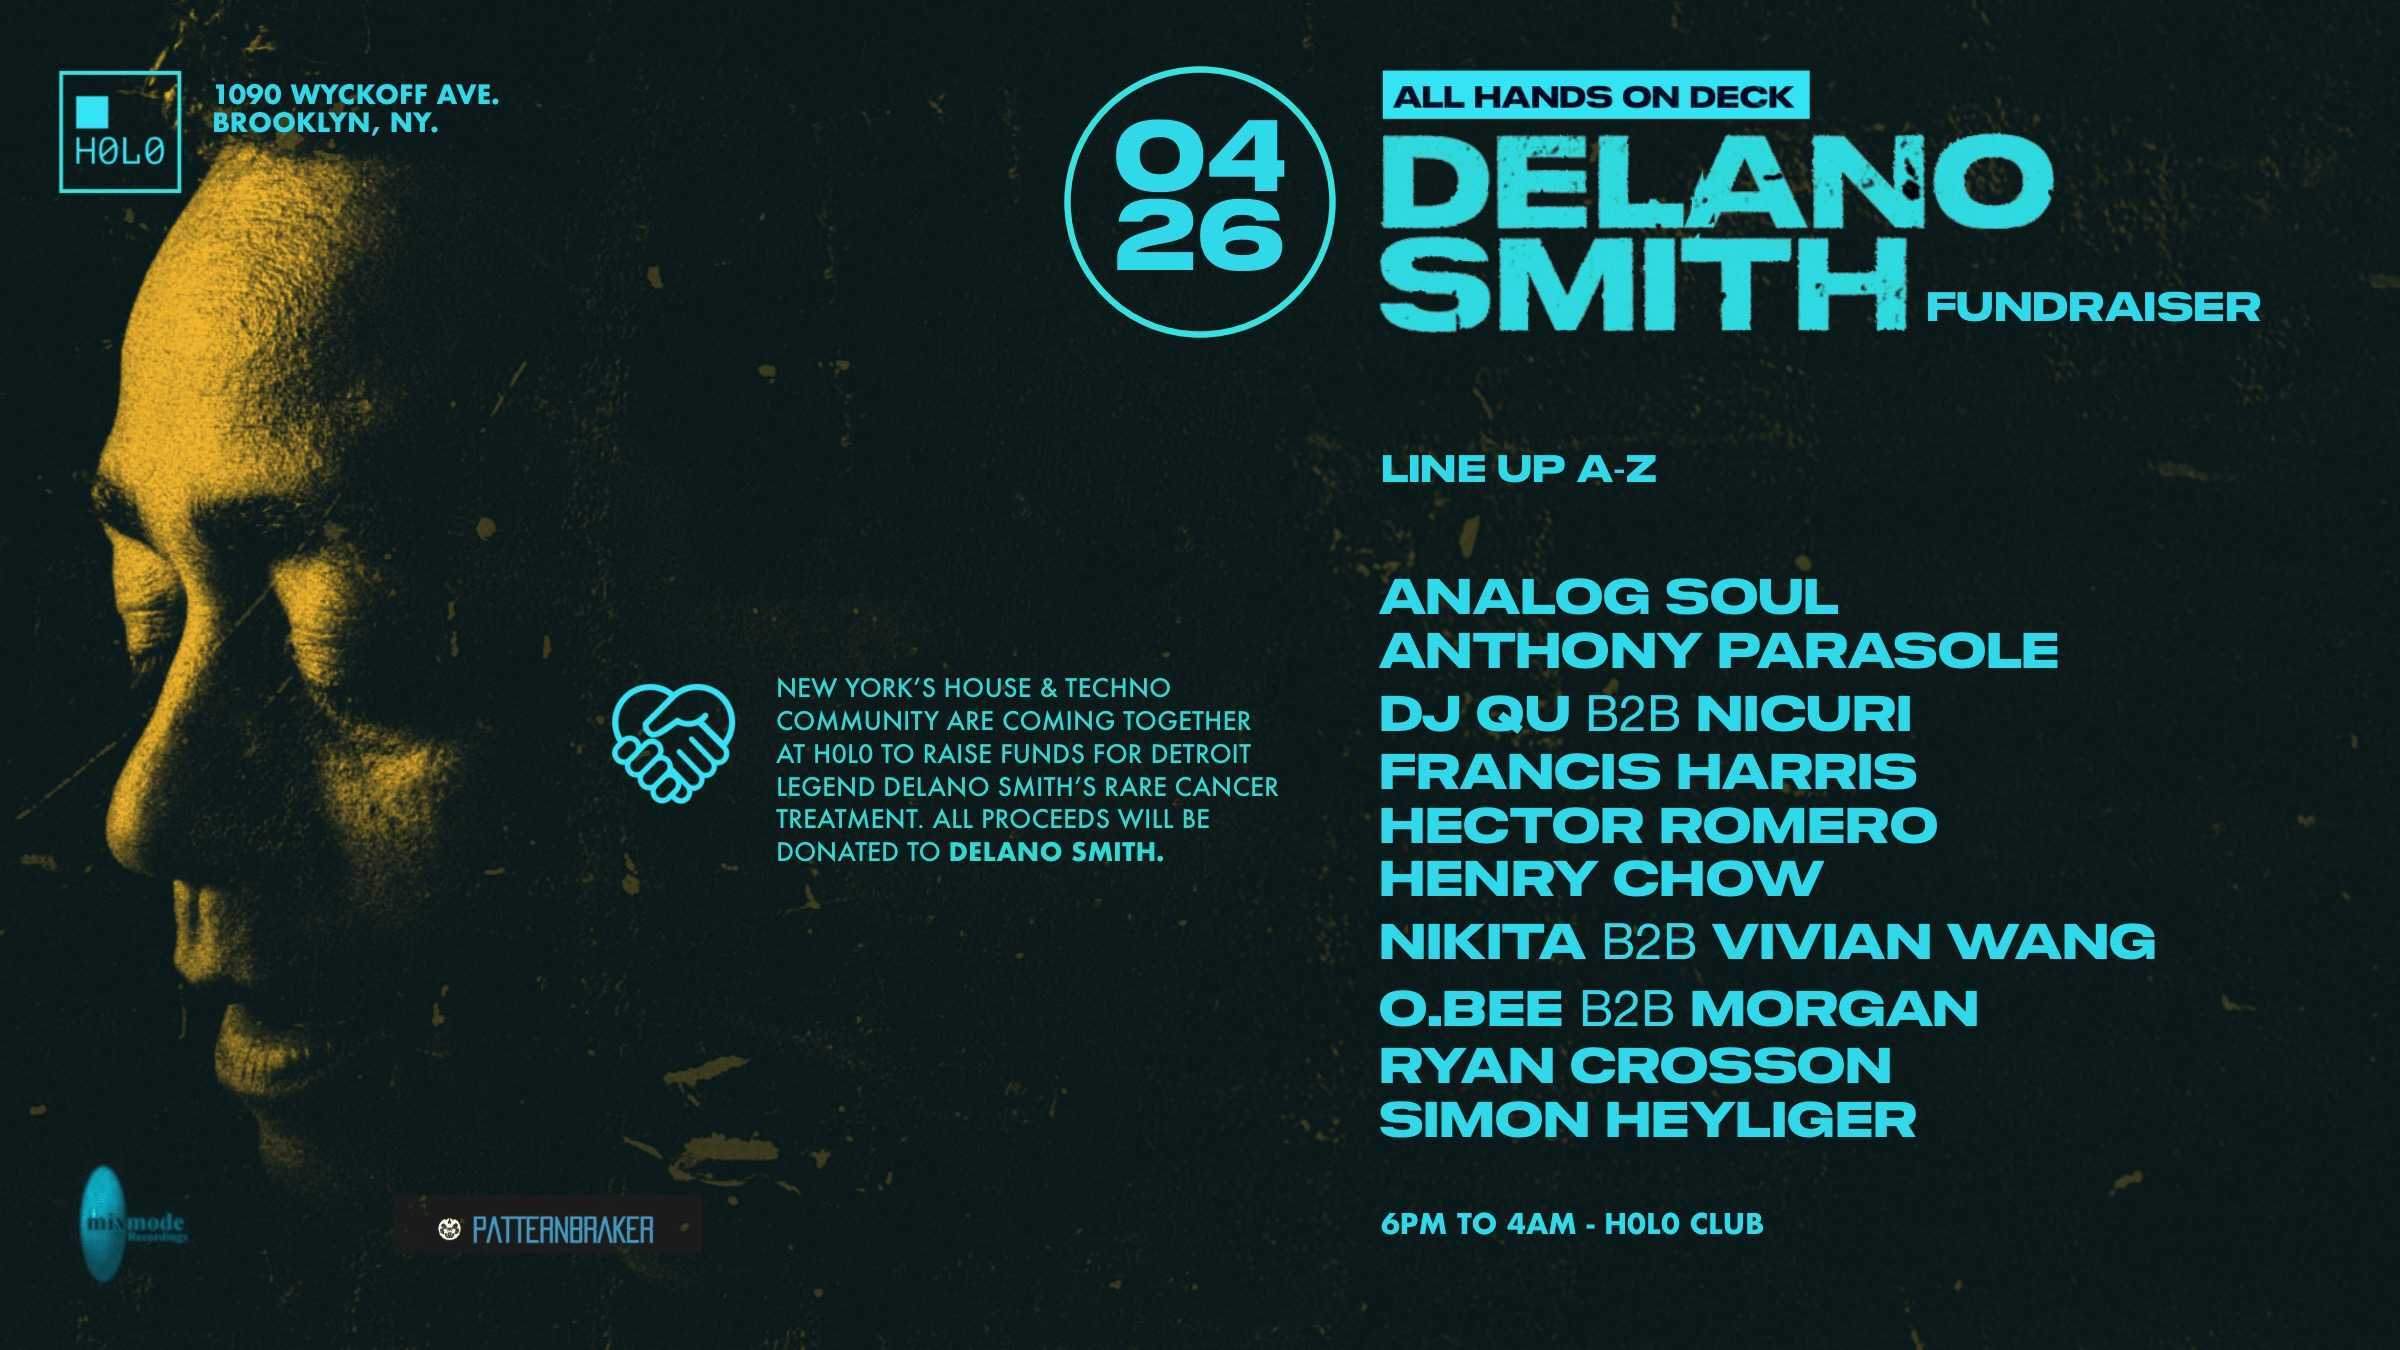 All Hands on Deck: Fundraiser for Delano Smith - Página frontal